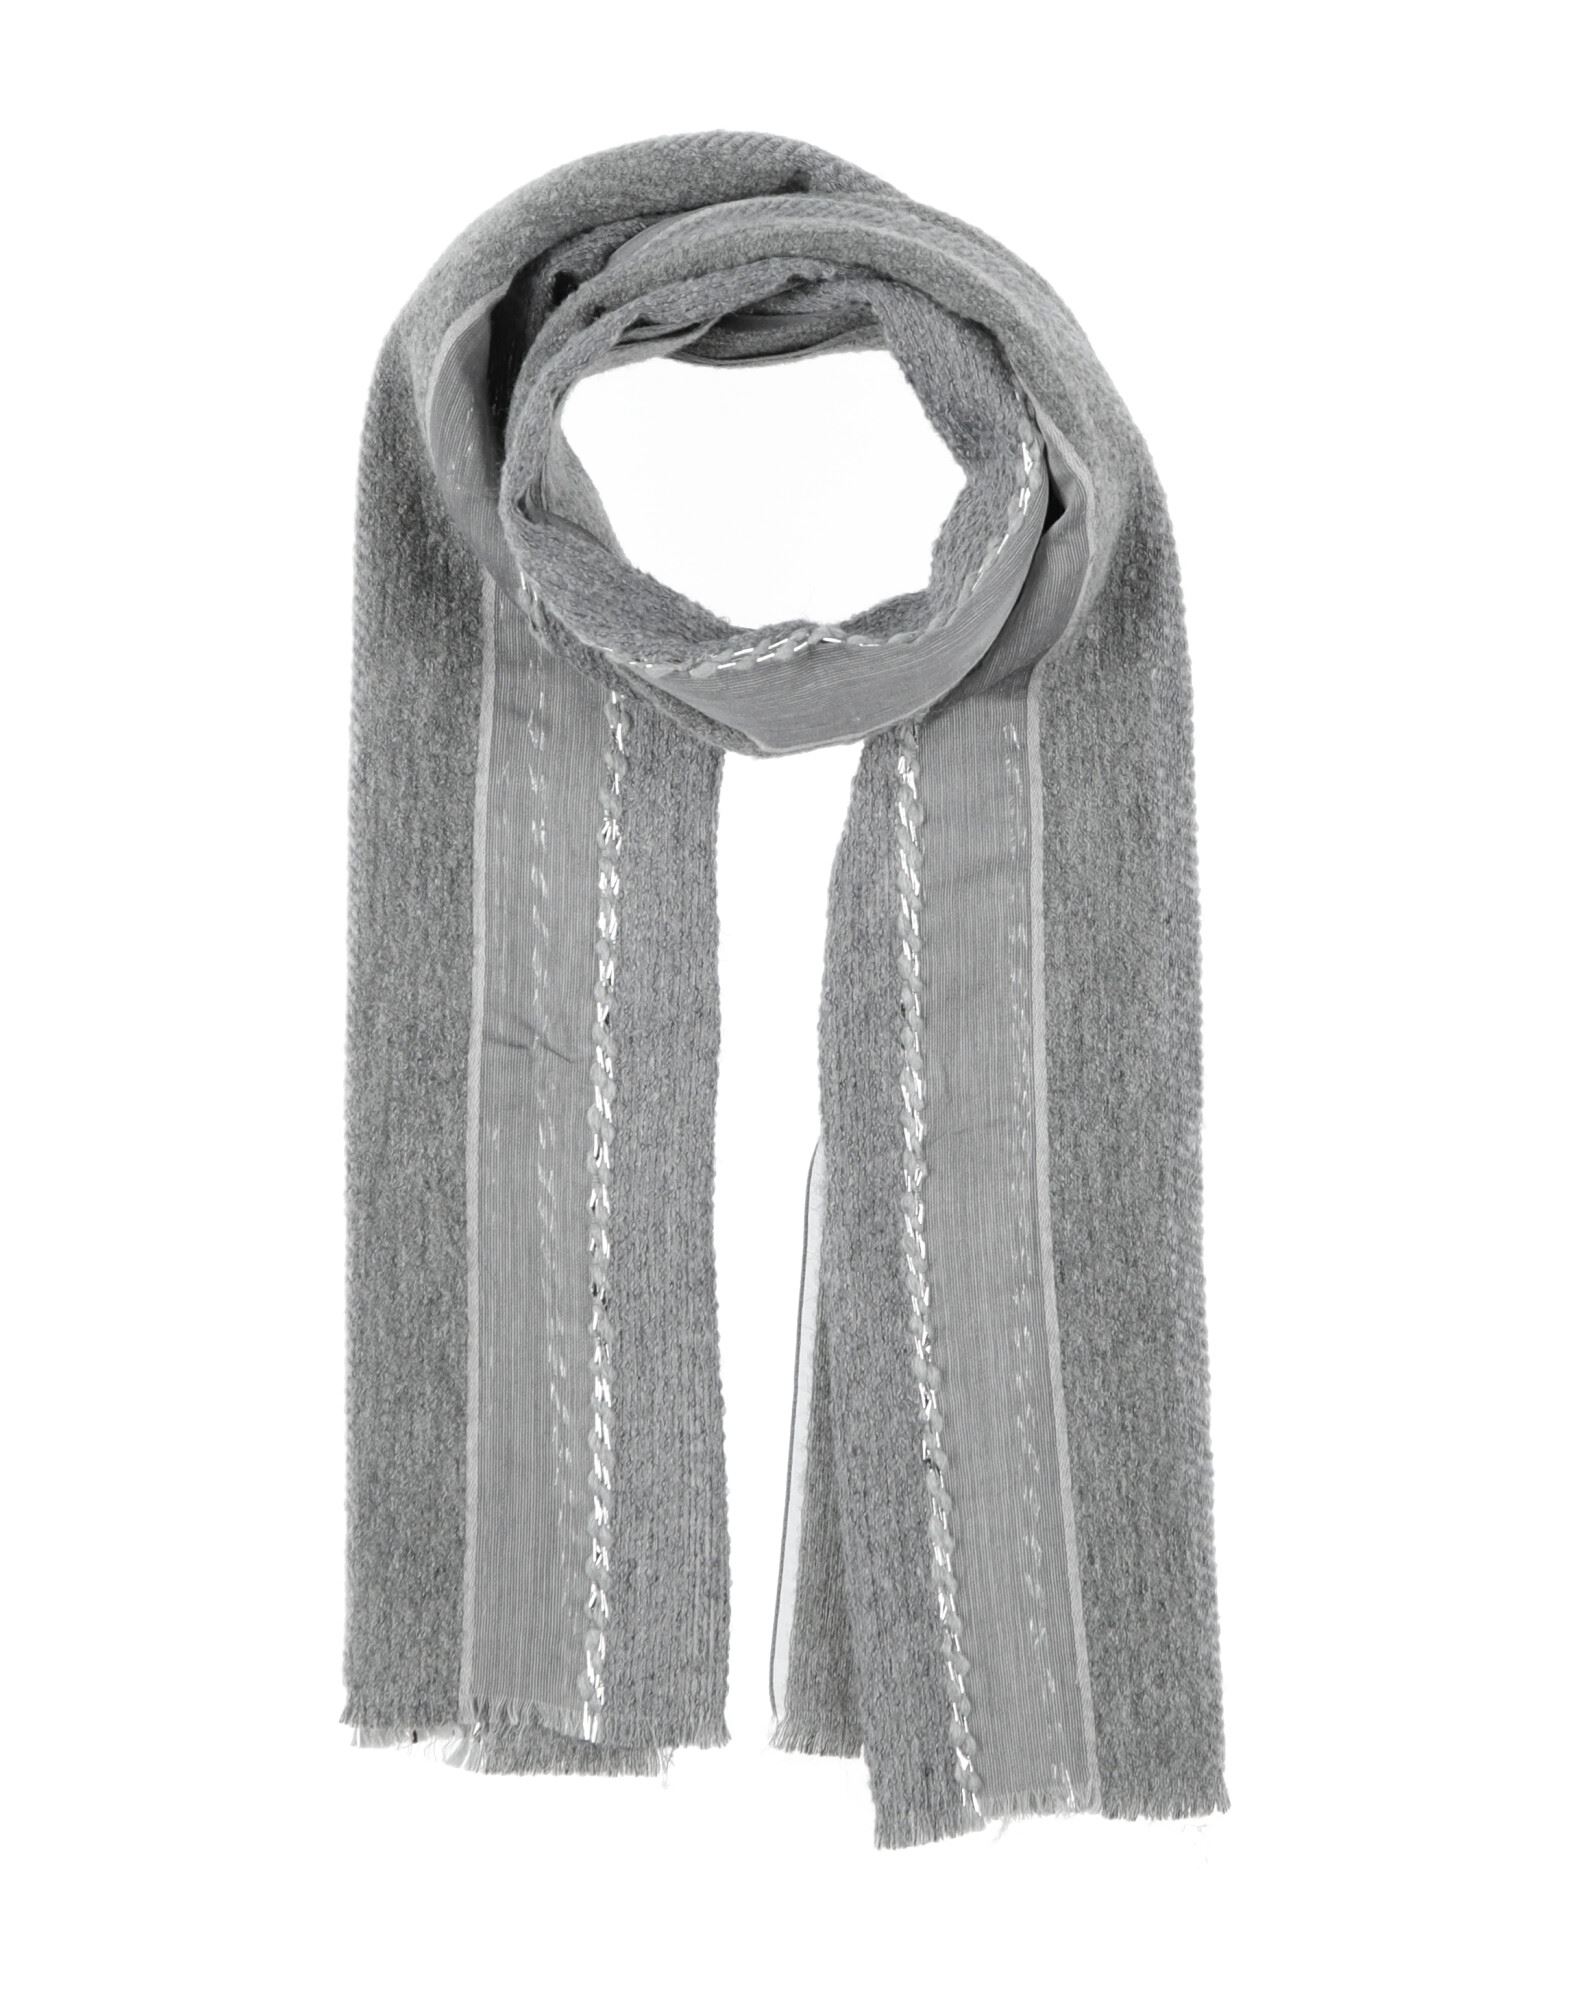 FIORIO FIORIO WOMAN SCARF GREY SIZE - SYNTHETIC FIBERS, WOOL, SILK, MOHAIR WOOL